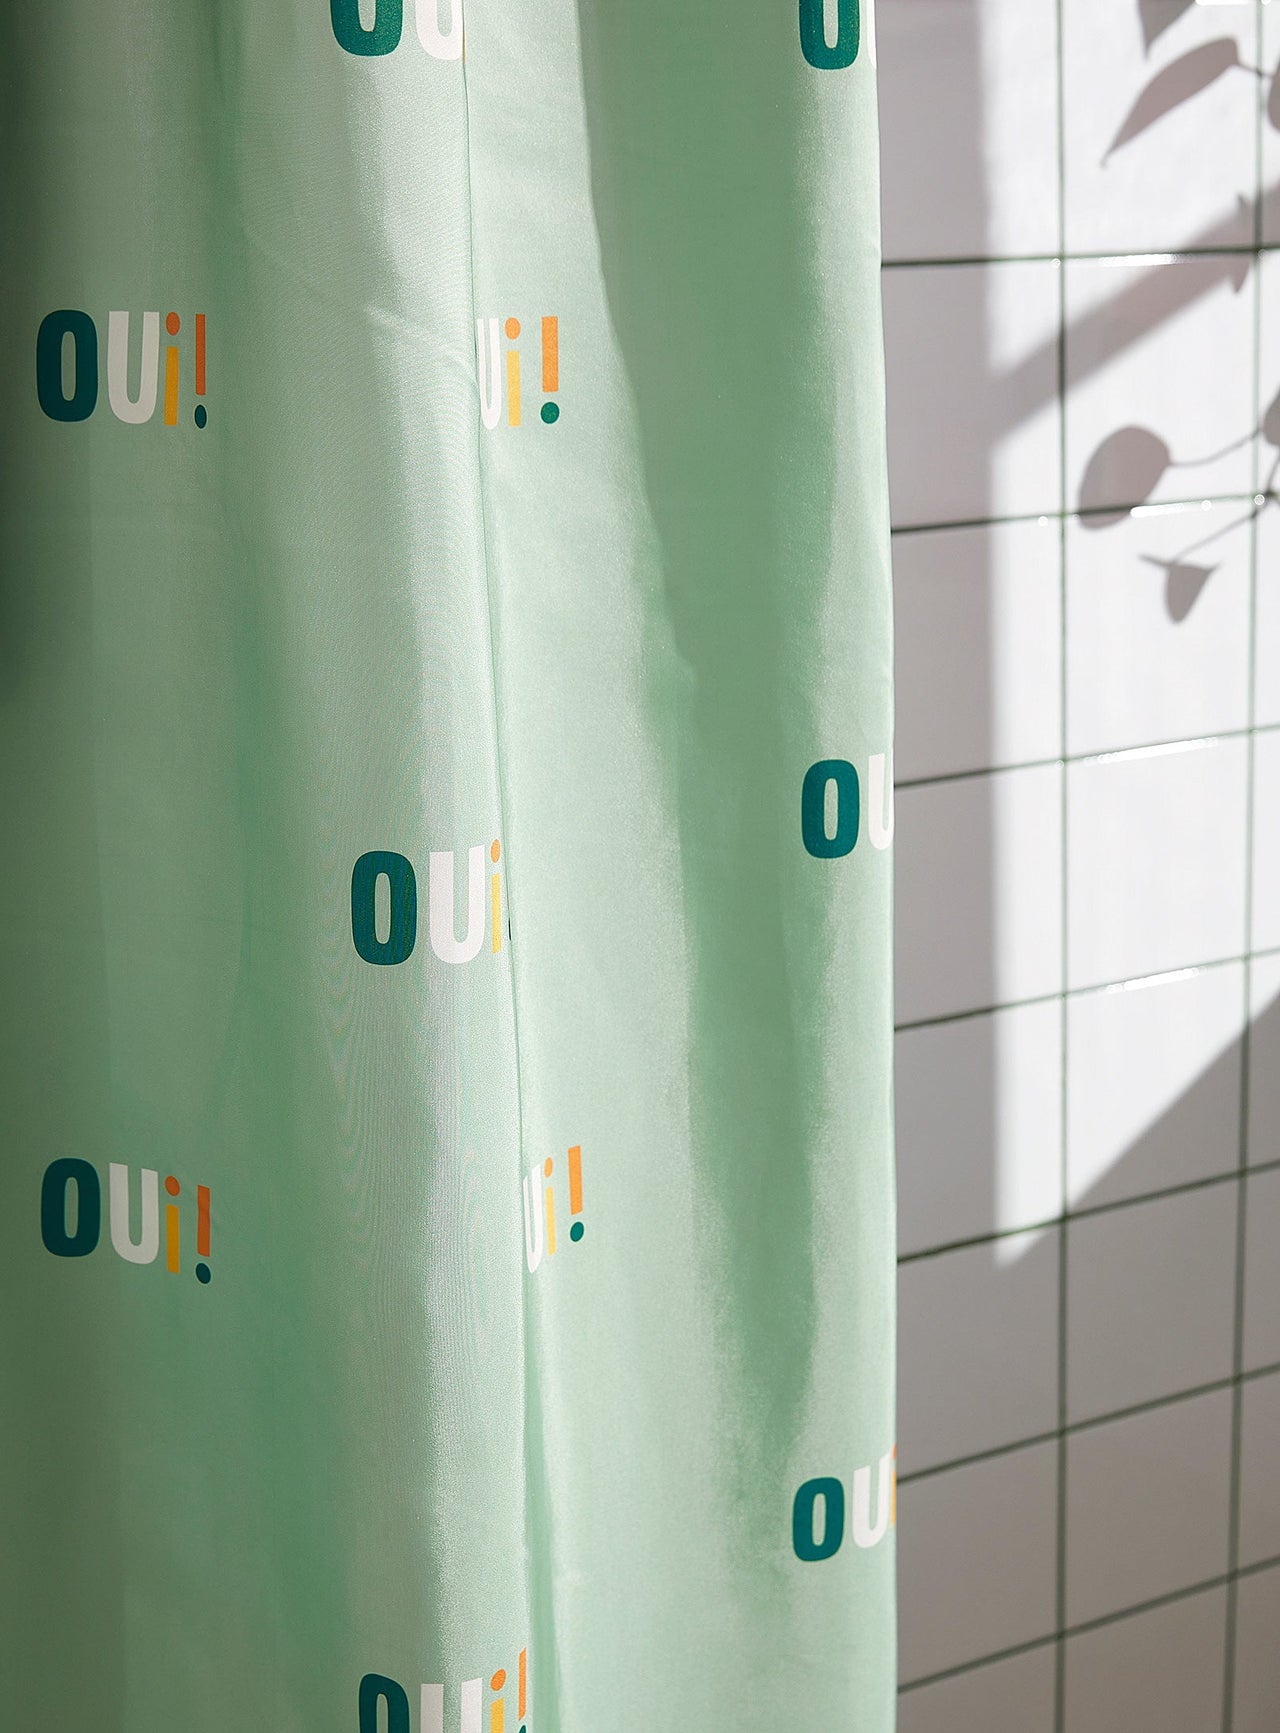 Oh que oui shower curtain